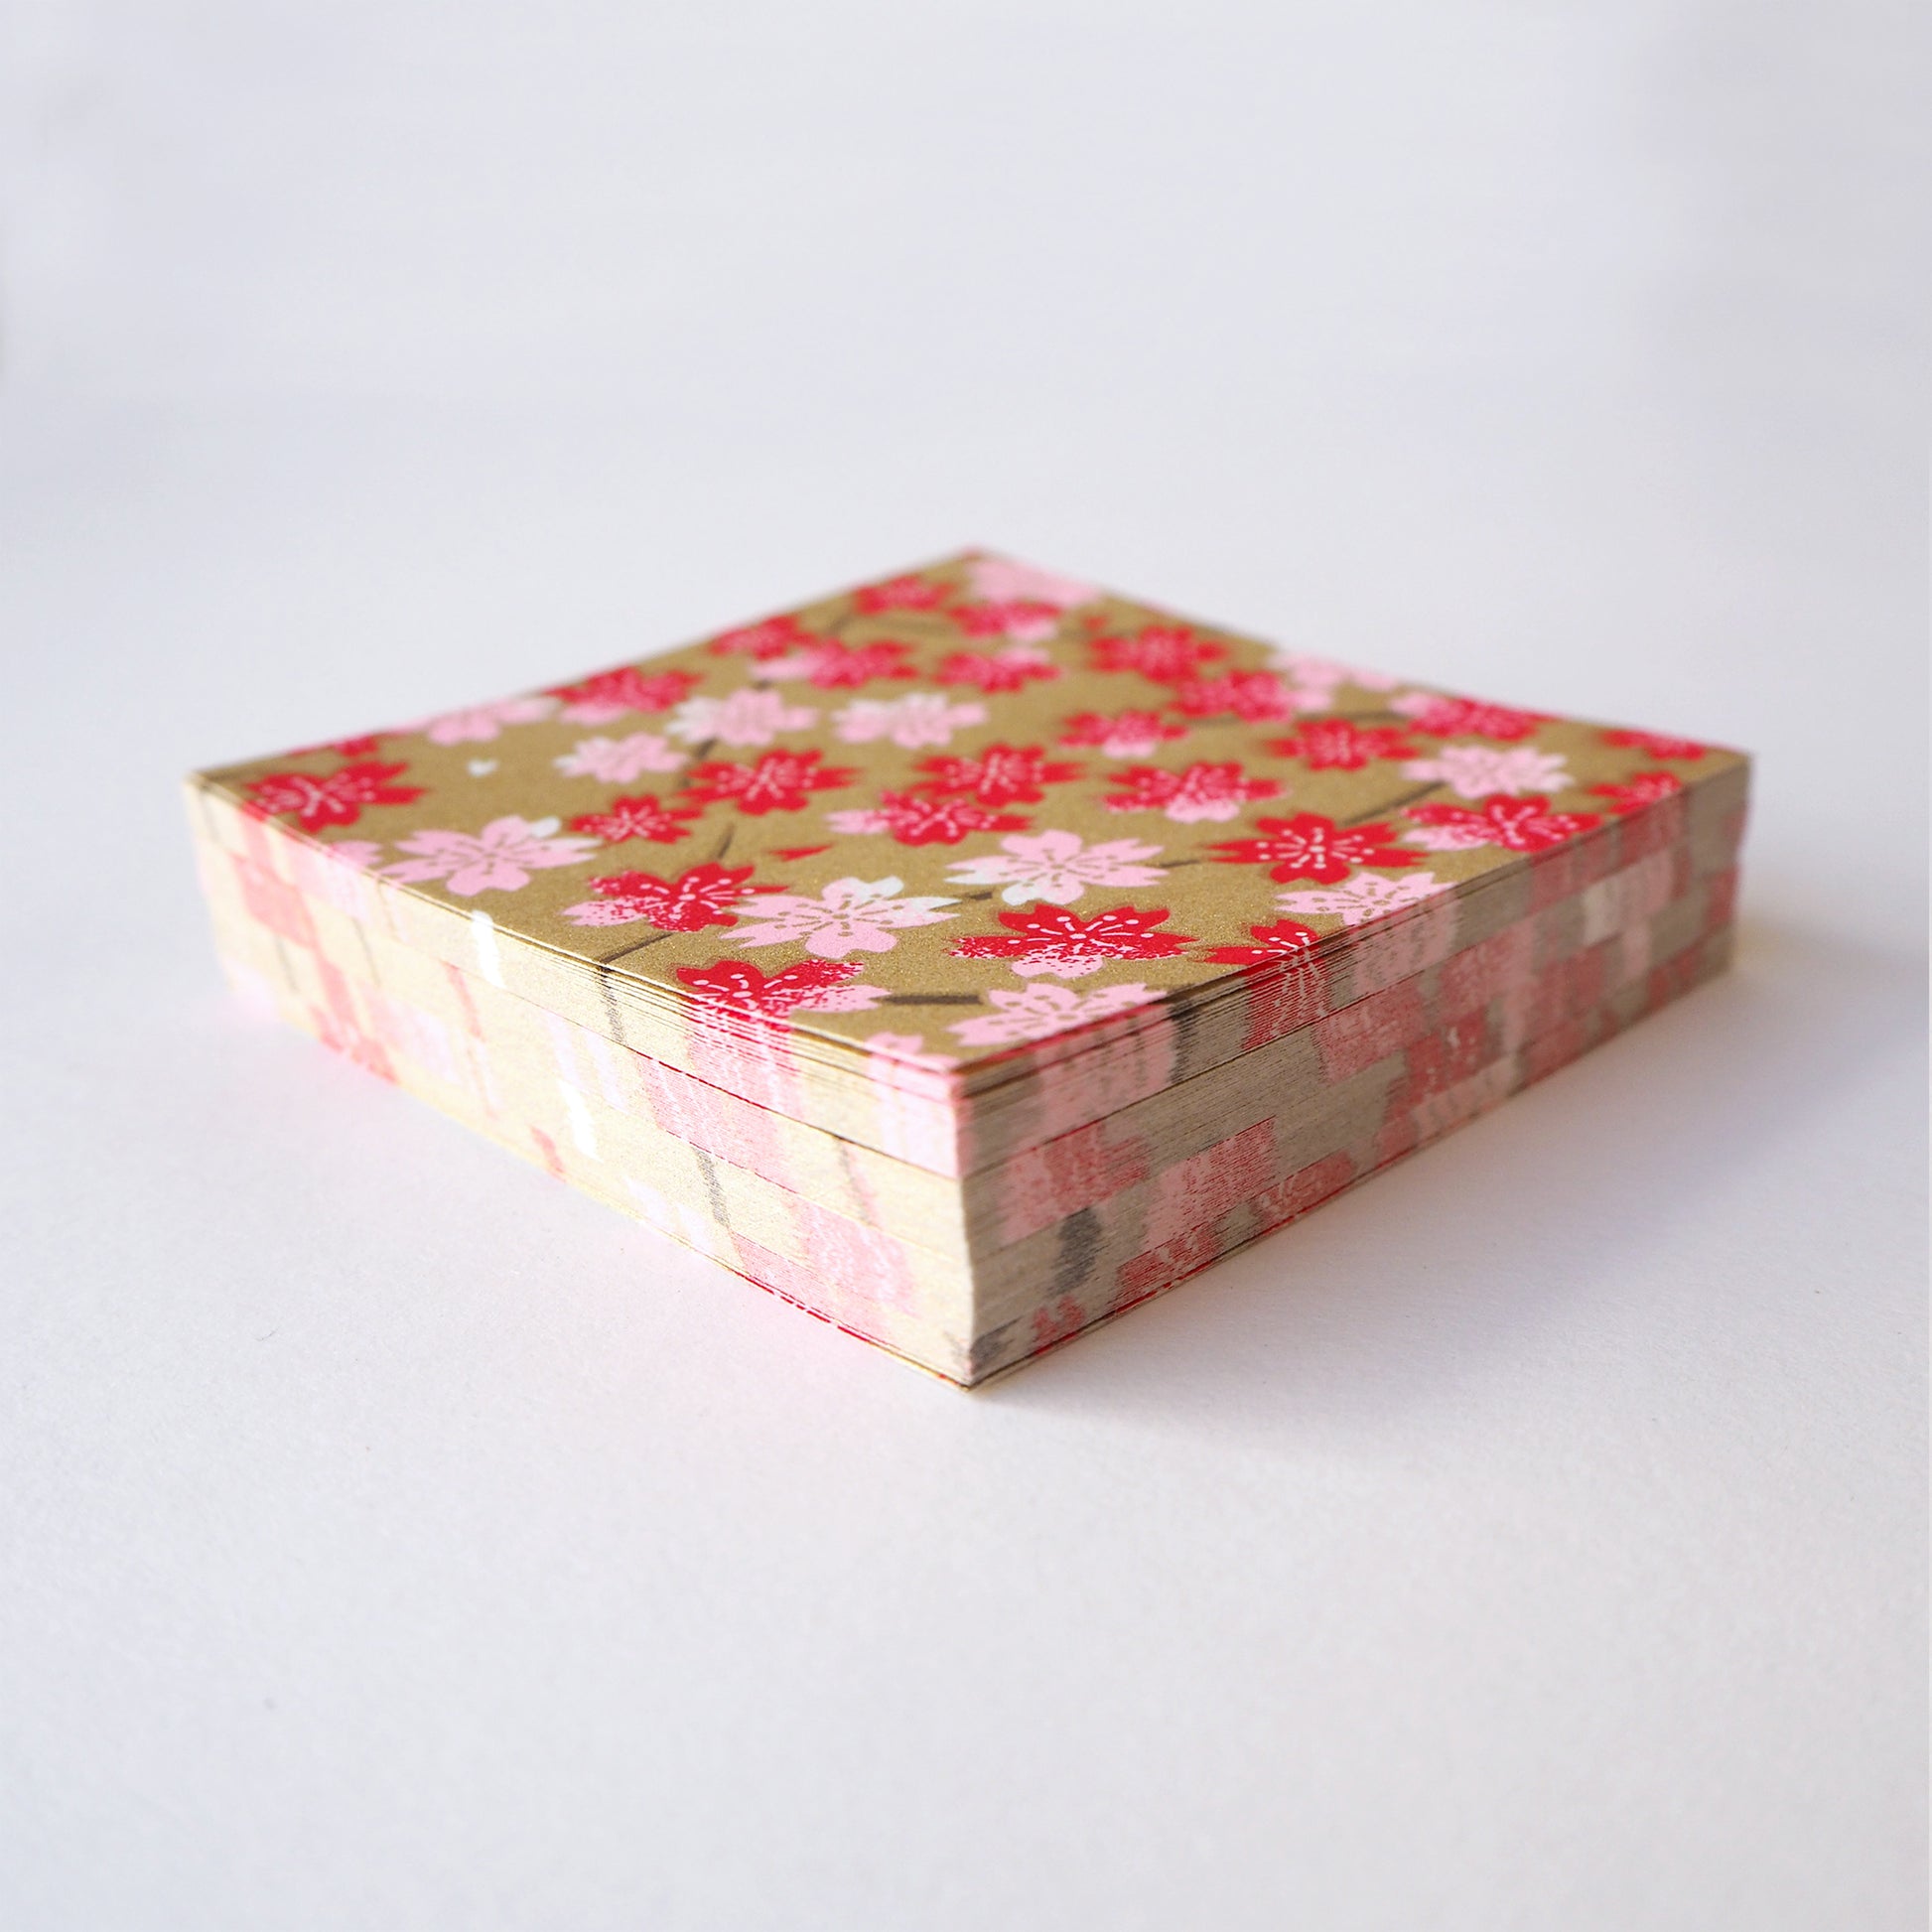 Pack of 100 Sheets 7x7cm Yuzen Washi Origami Paper HZ-490 - Red Pink Cherry Blossom Gold - washi paper - Lavender Home London